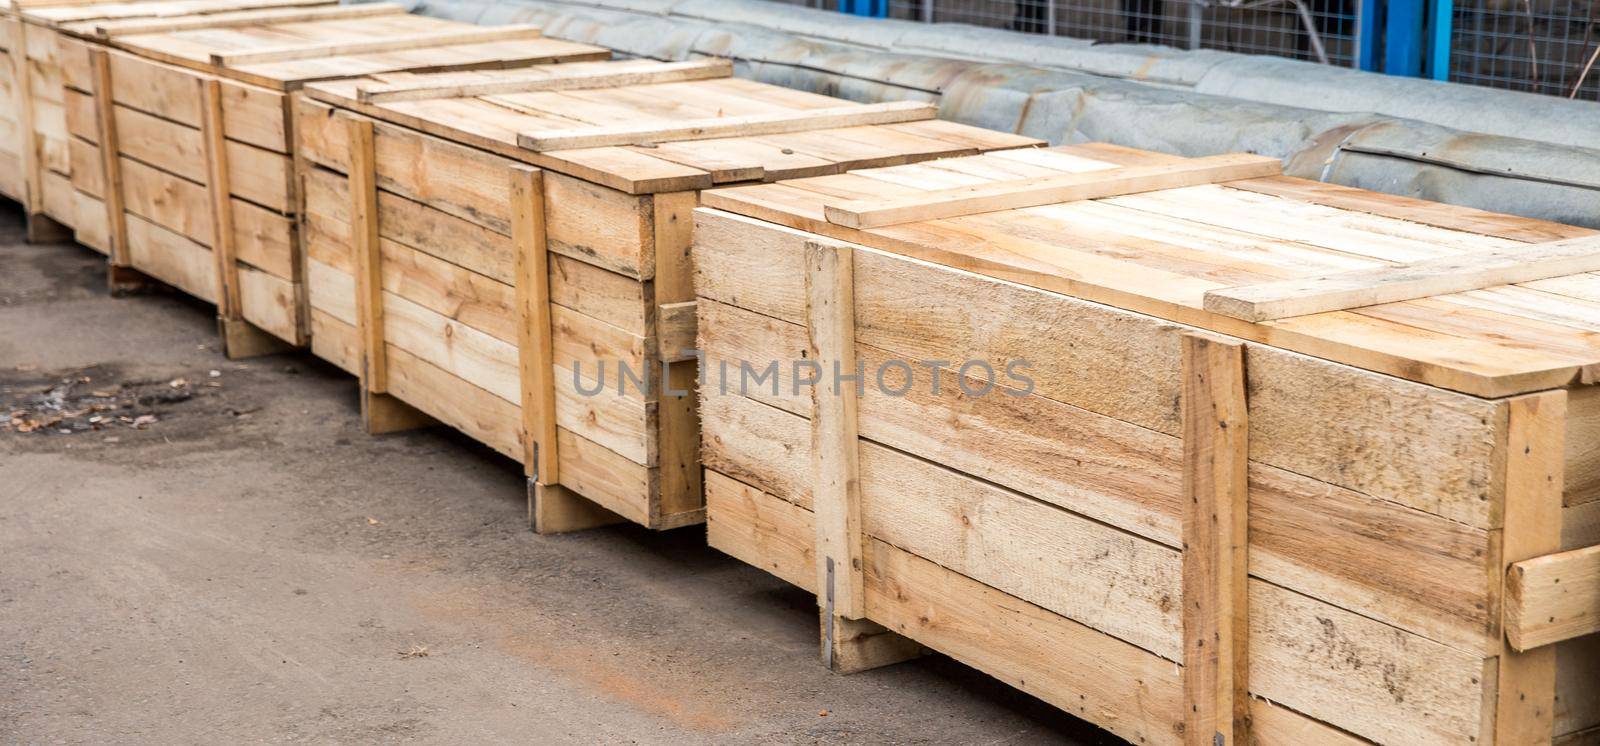 Many big wooden cargo containers standing outdoor by Mariakray